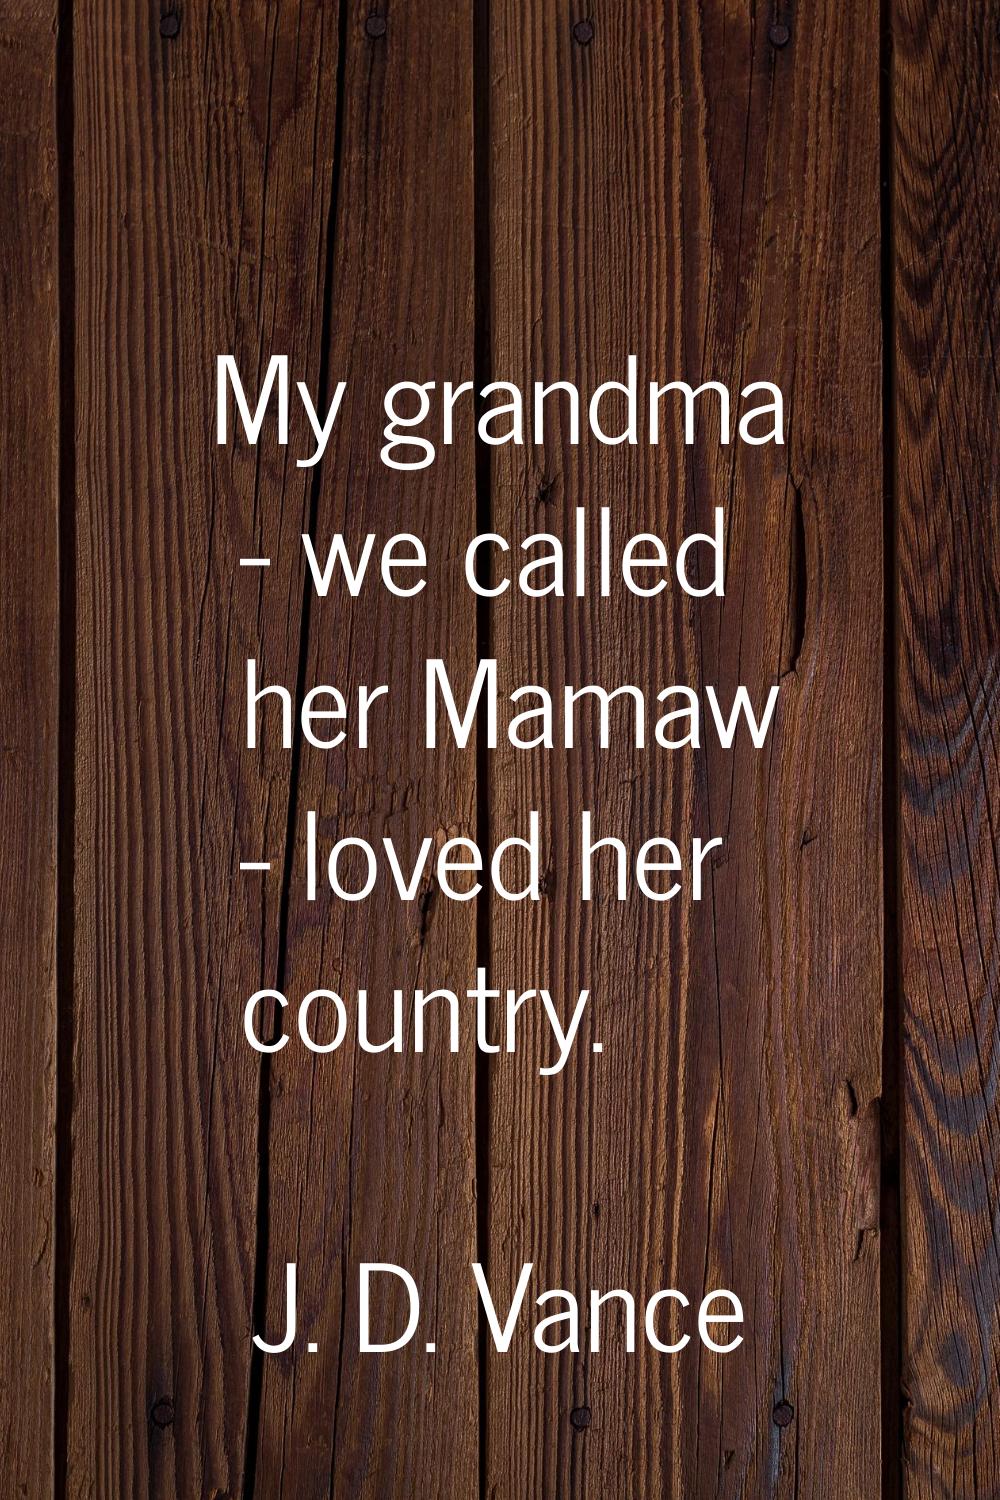 My grandma - we called her Mamaw - loved her country.